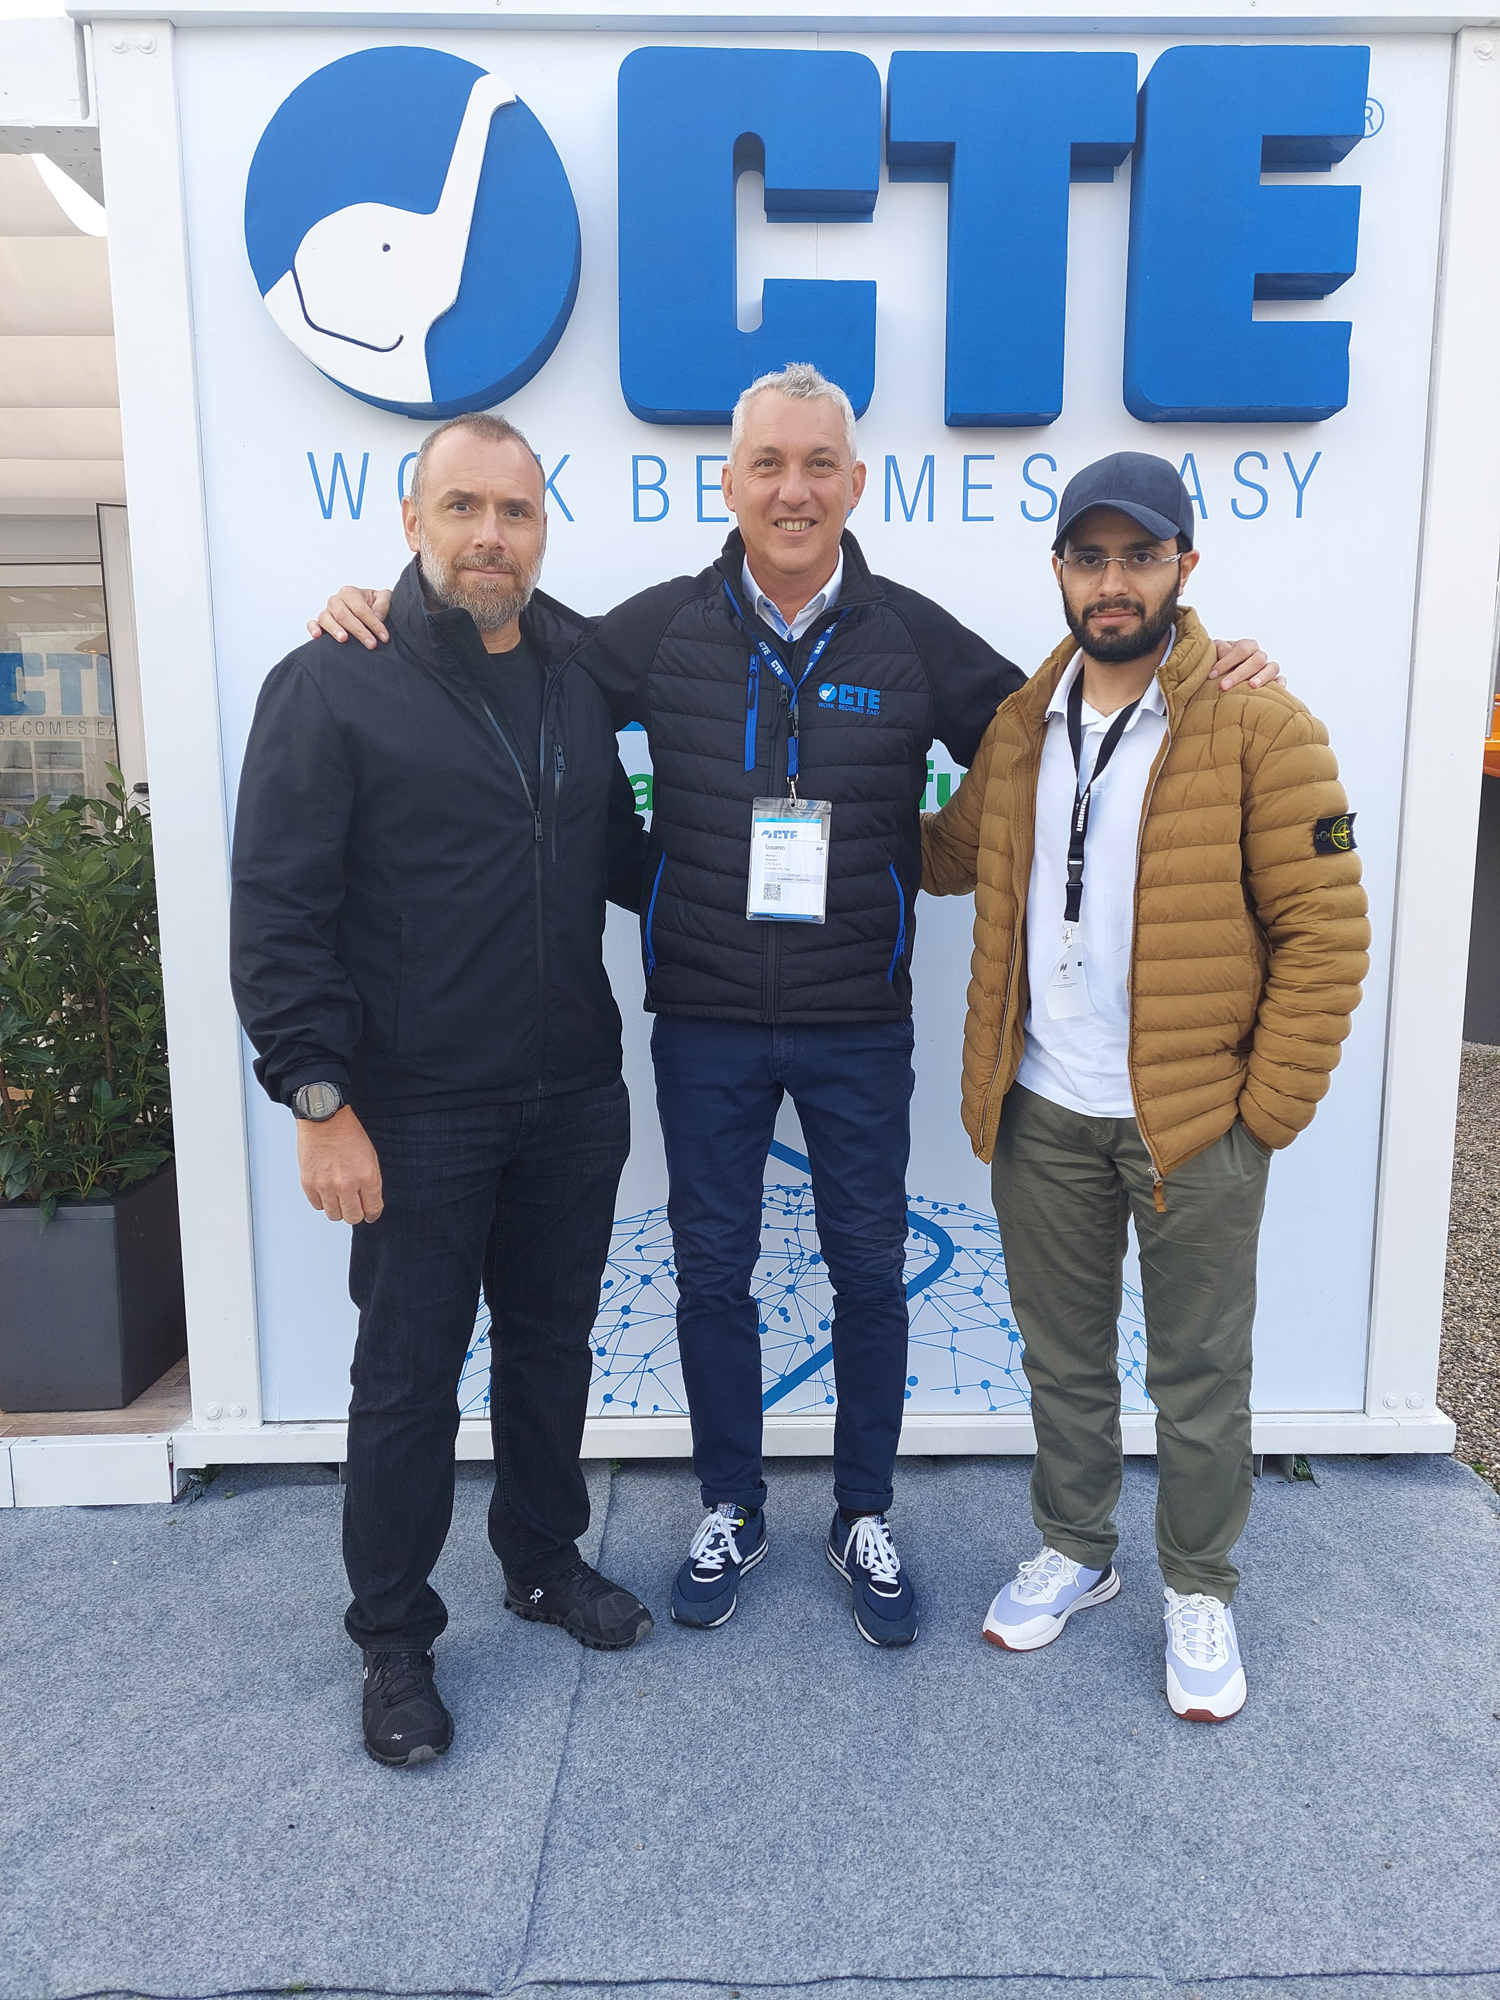 In the picture, from left, Eng. Mohamad A. Badreddine Metal Work Co. Sales Manager, Marco Govoni CTE Sales Director, and Mr. Talal Althinayyan Metal Work Co. Regional Sales Manager.